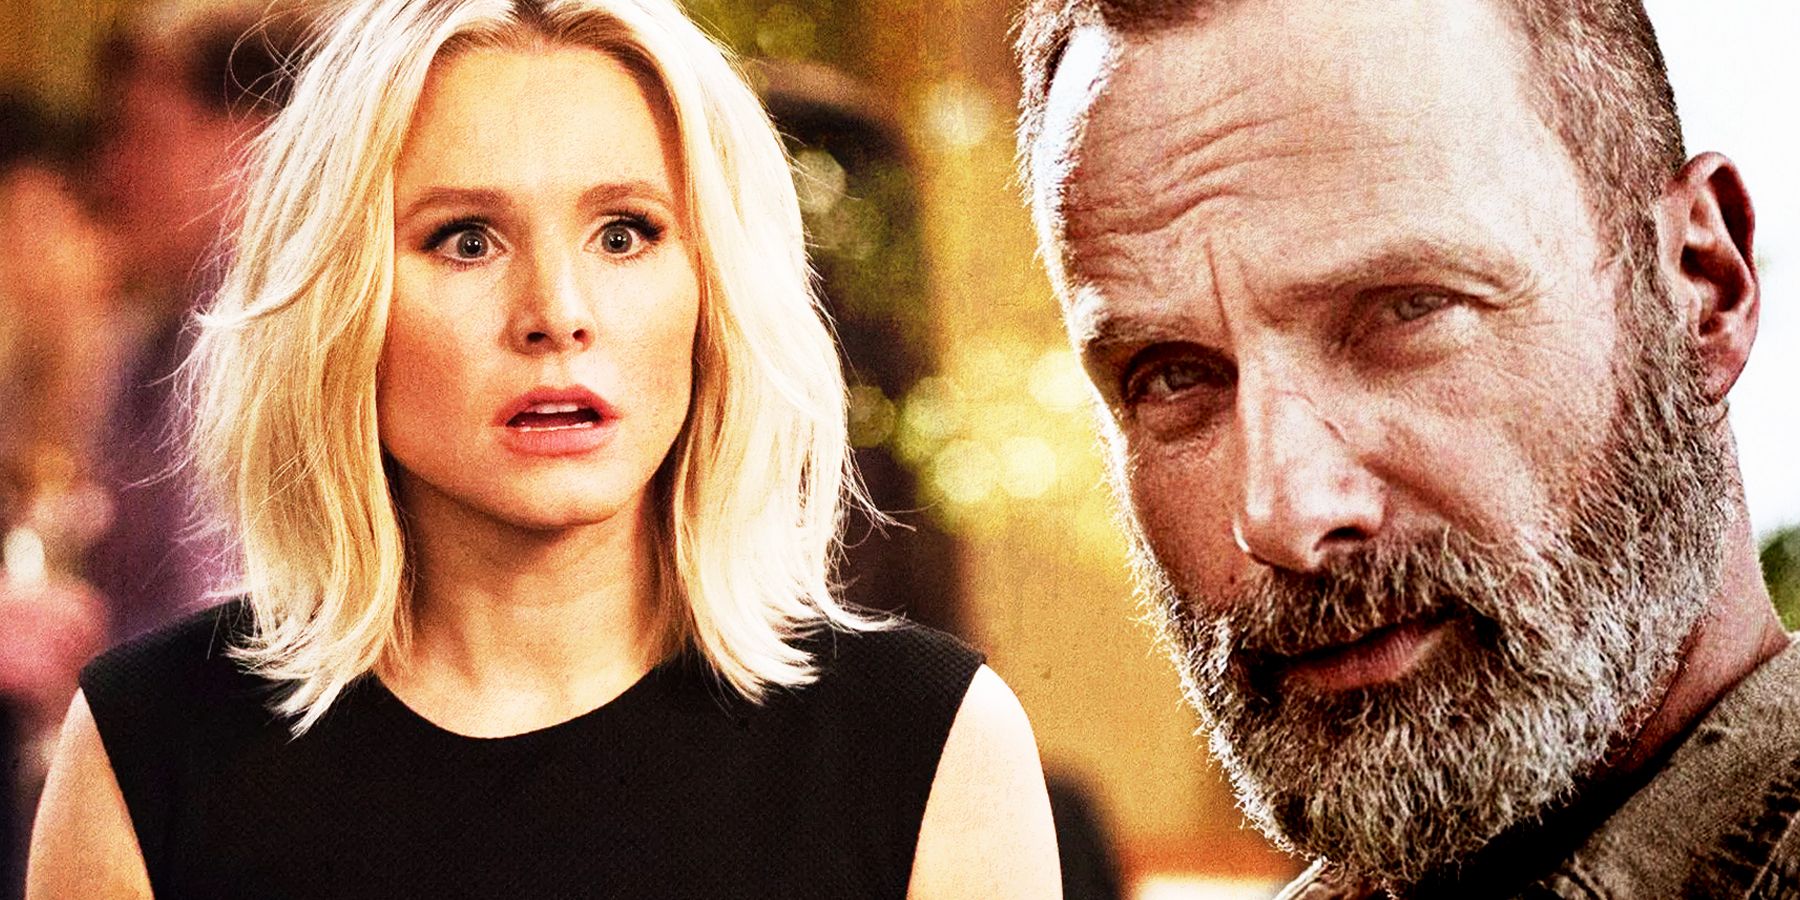 A split image of Eleanor in The Good Place and Rick Grimes in The Walking Dead